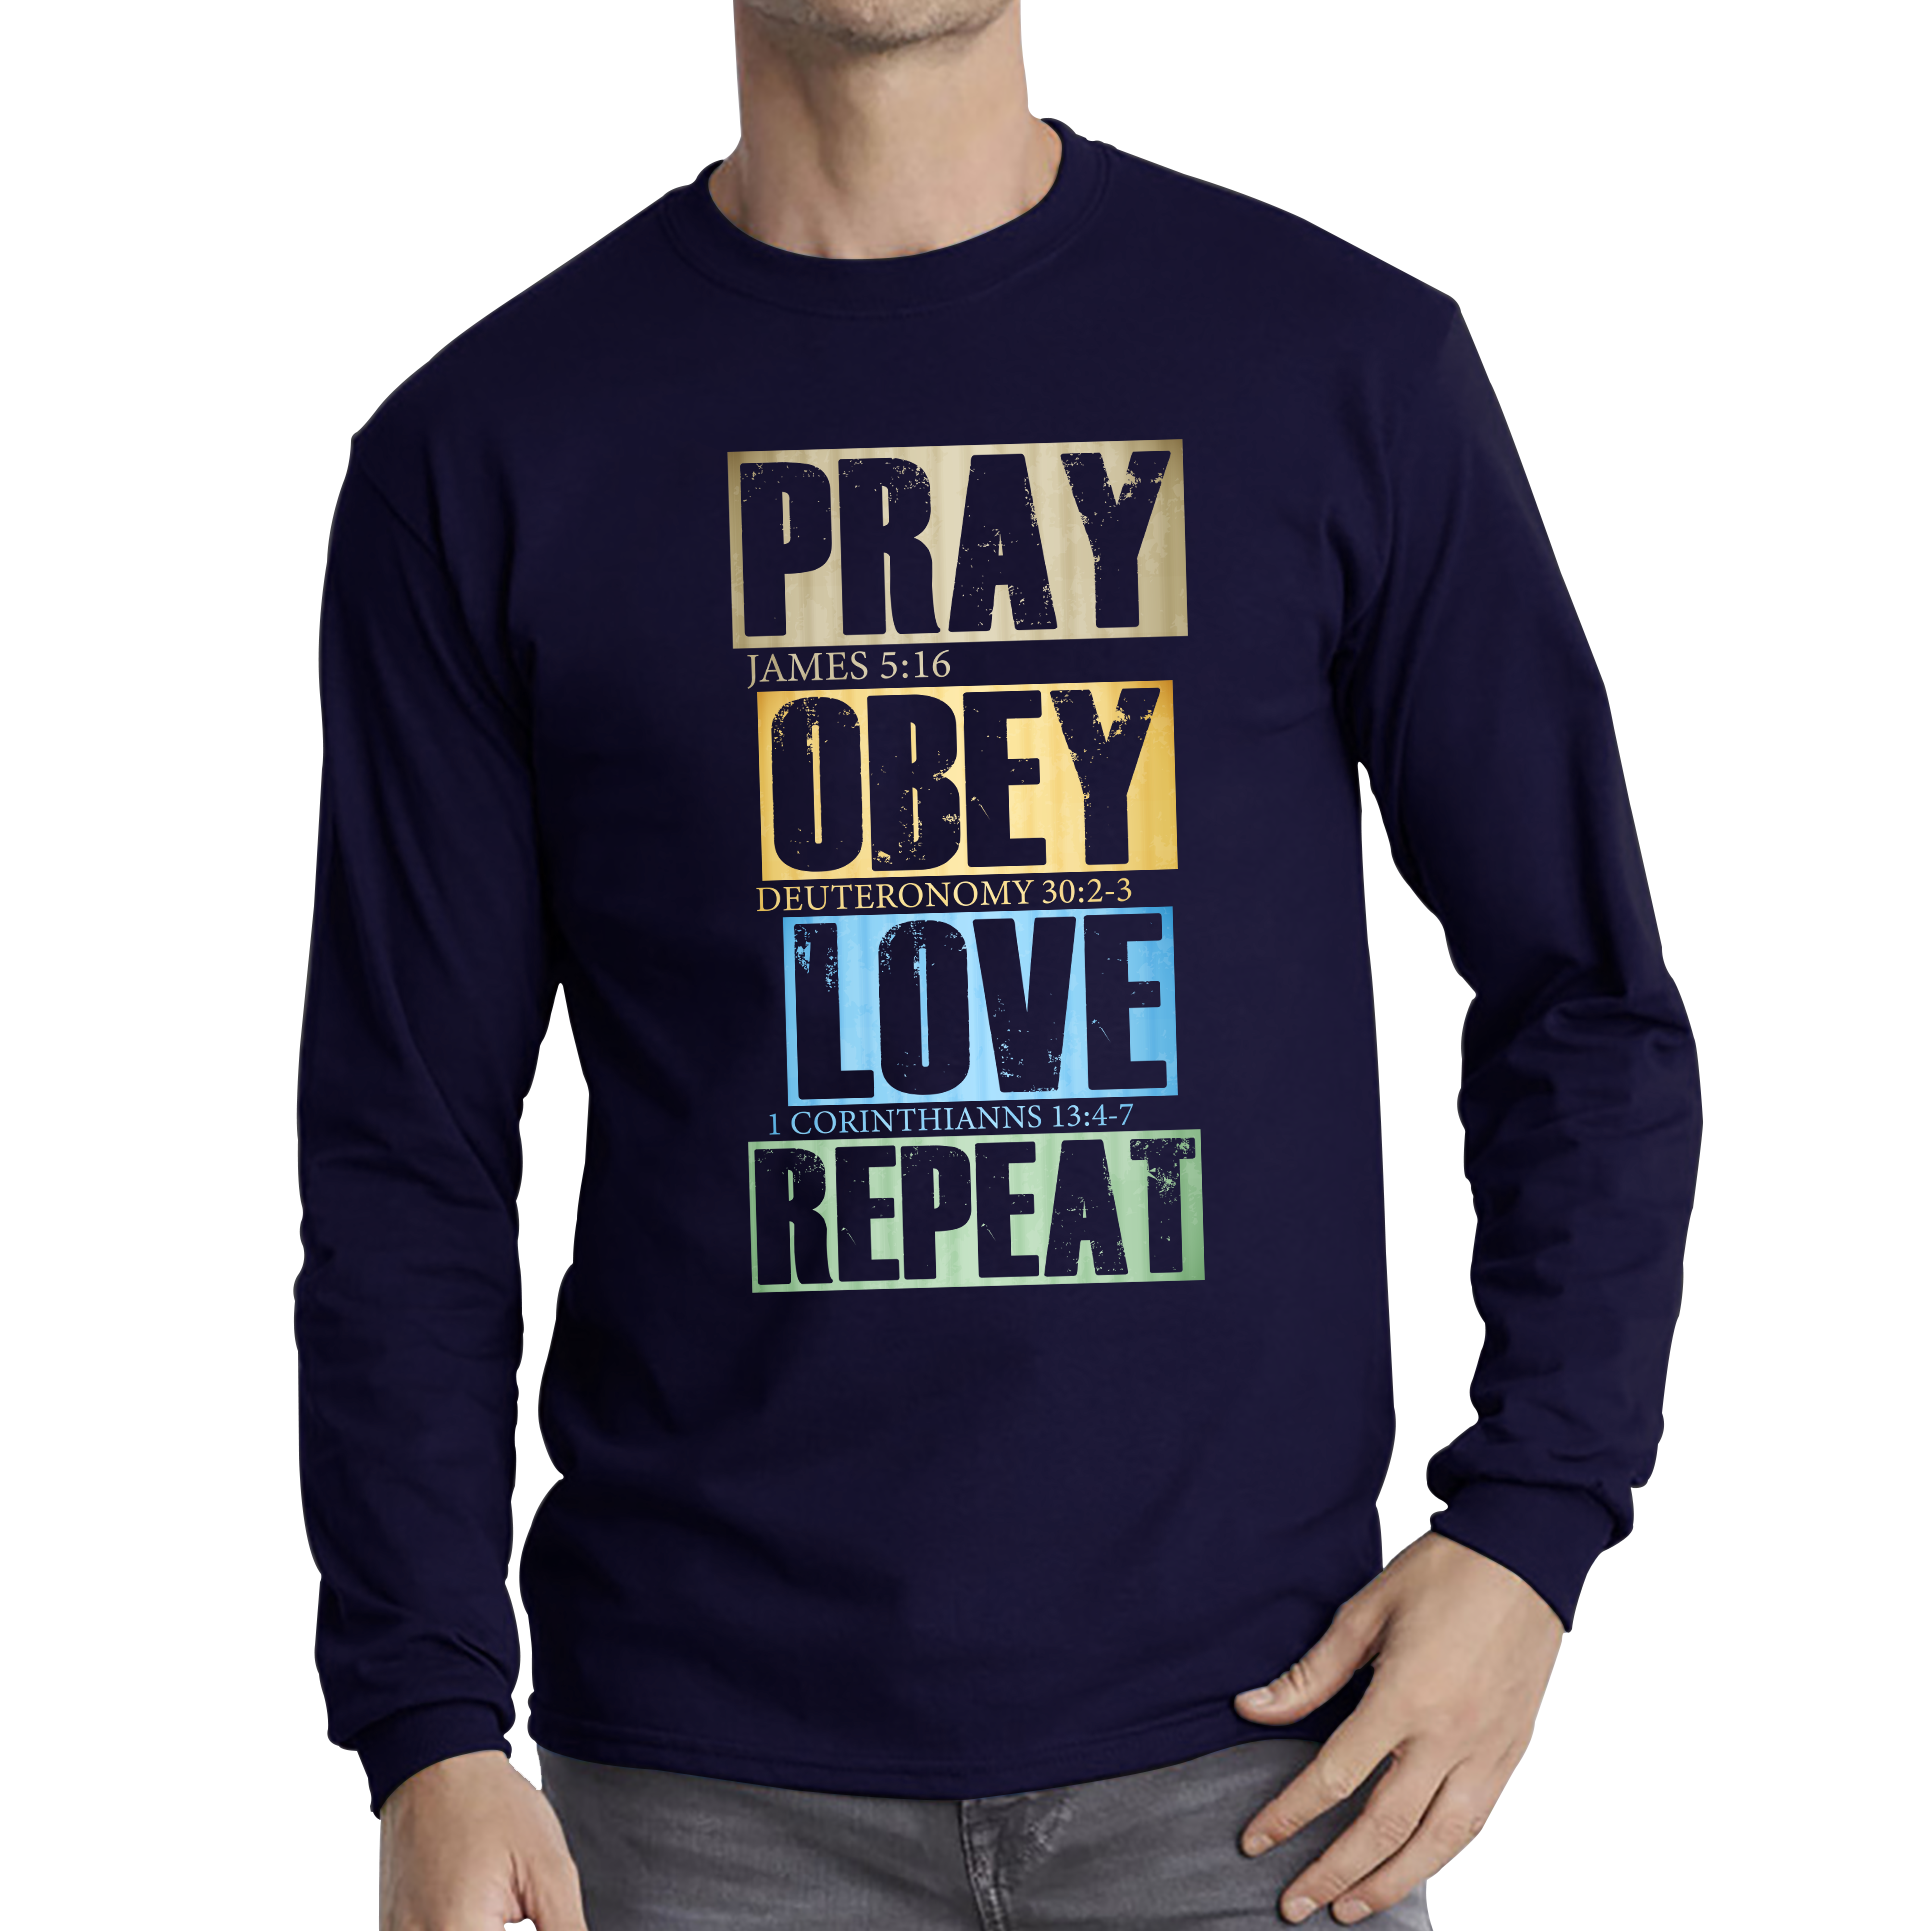 Pray Obey Love Repeat Vintage Christian Bible Christianity Long Sleeve T Shirt